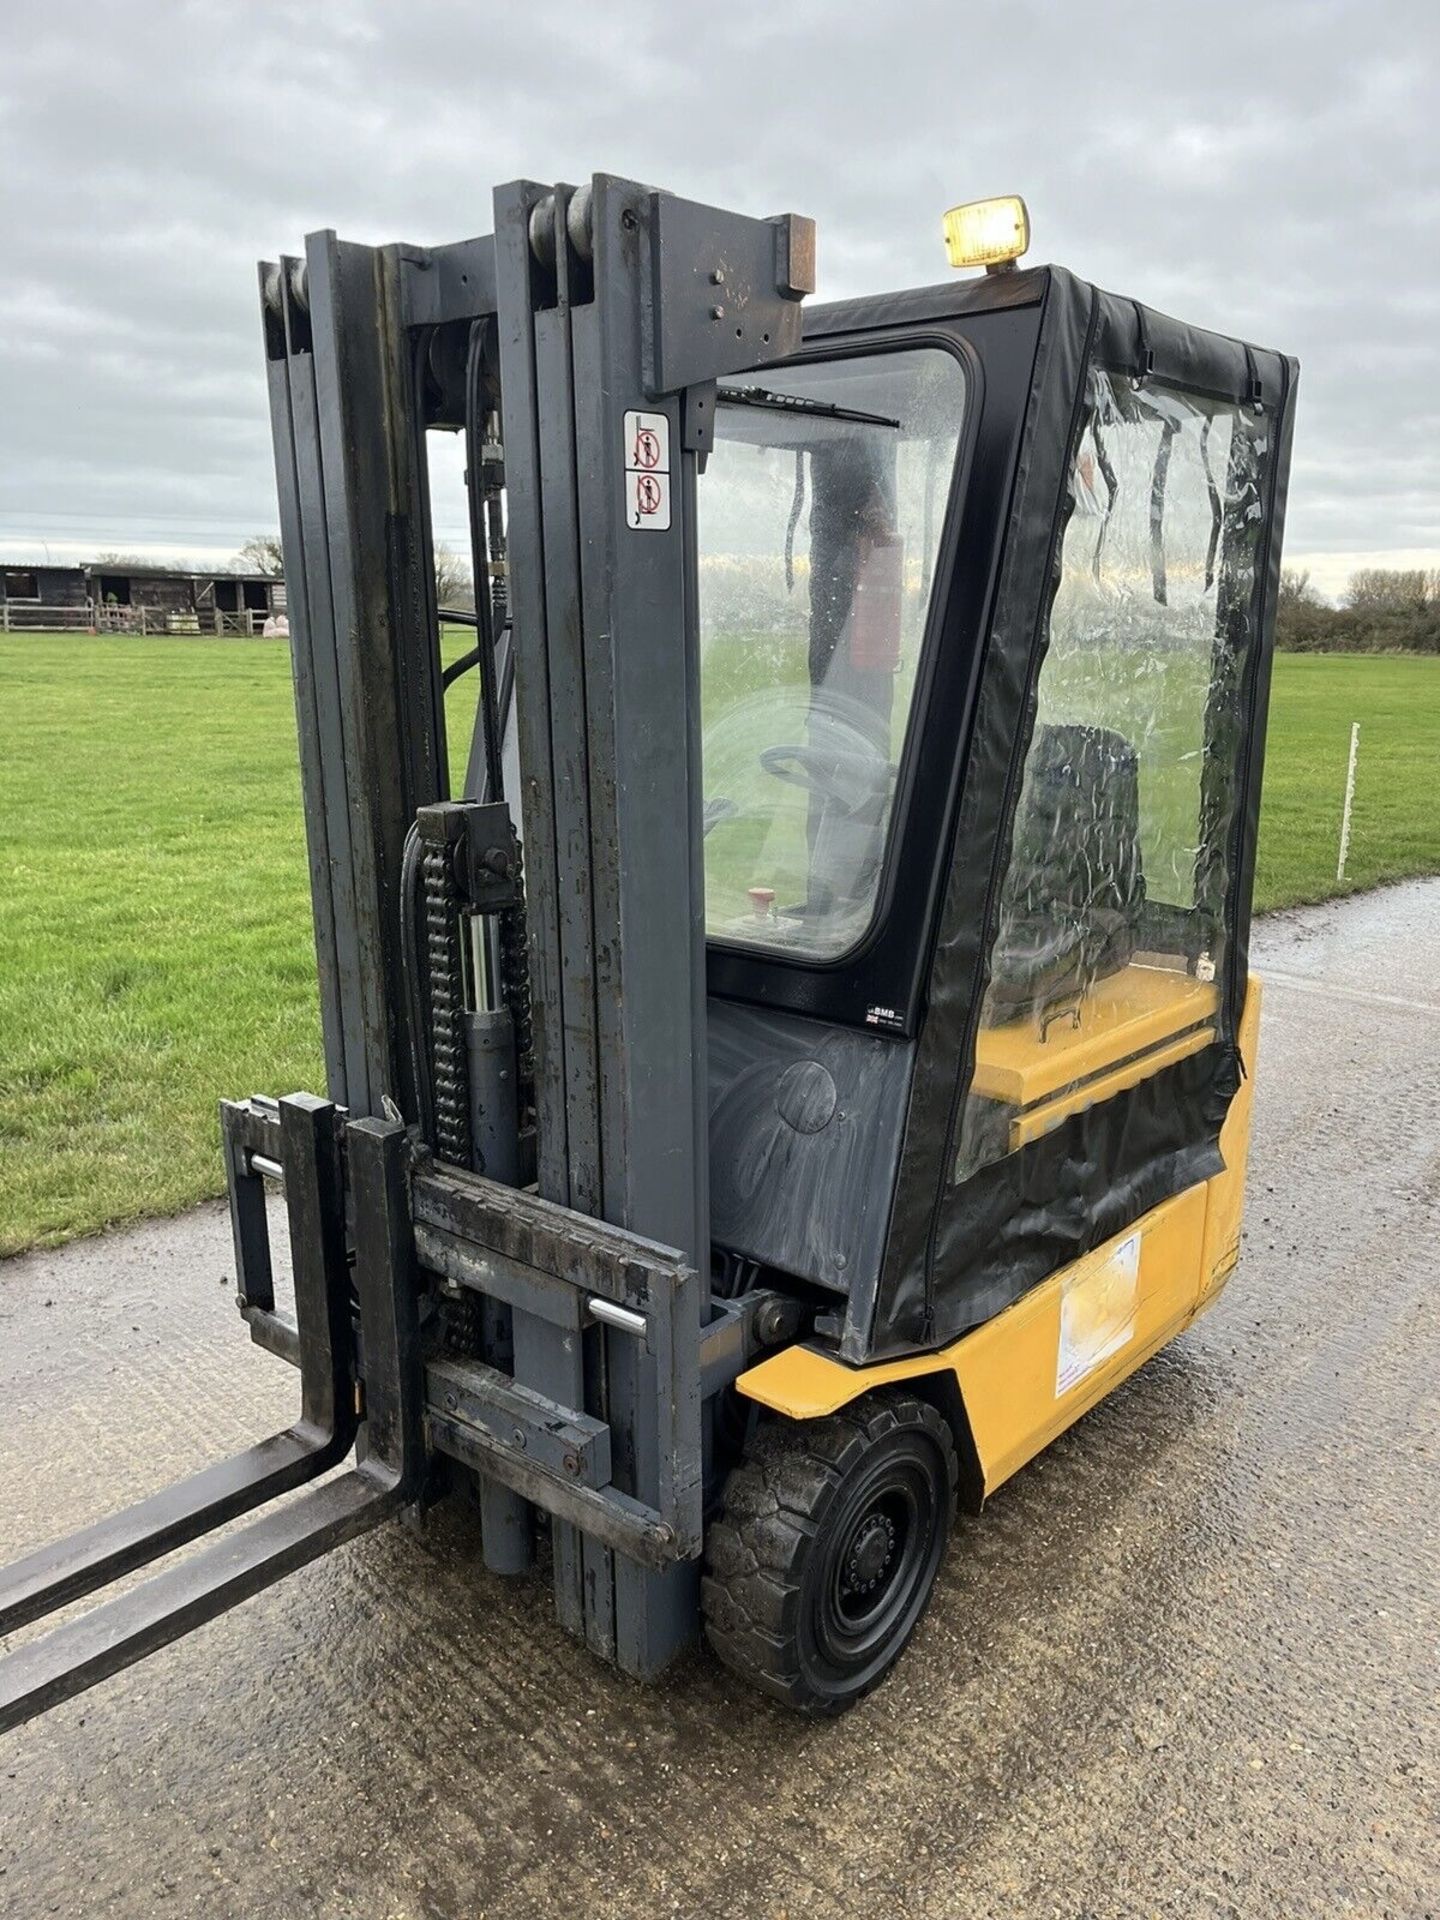 2019, BOSS 1.6 Electric Forklift Truck (Container Spec)